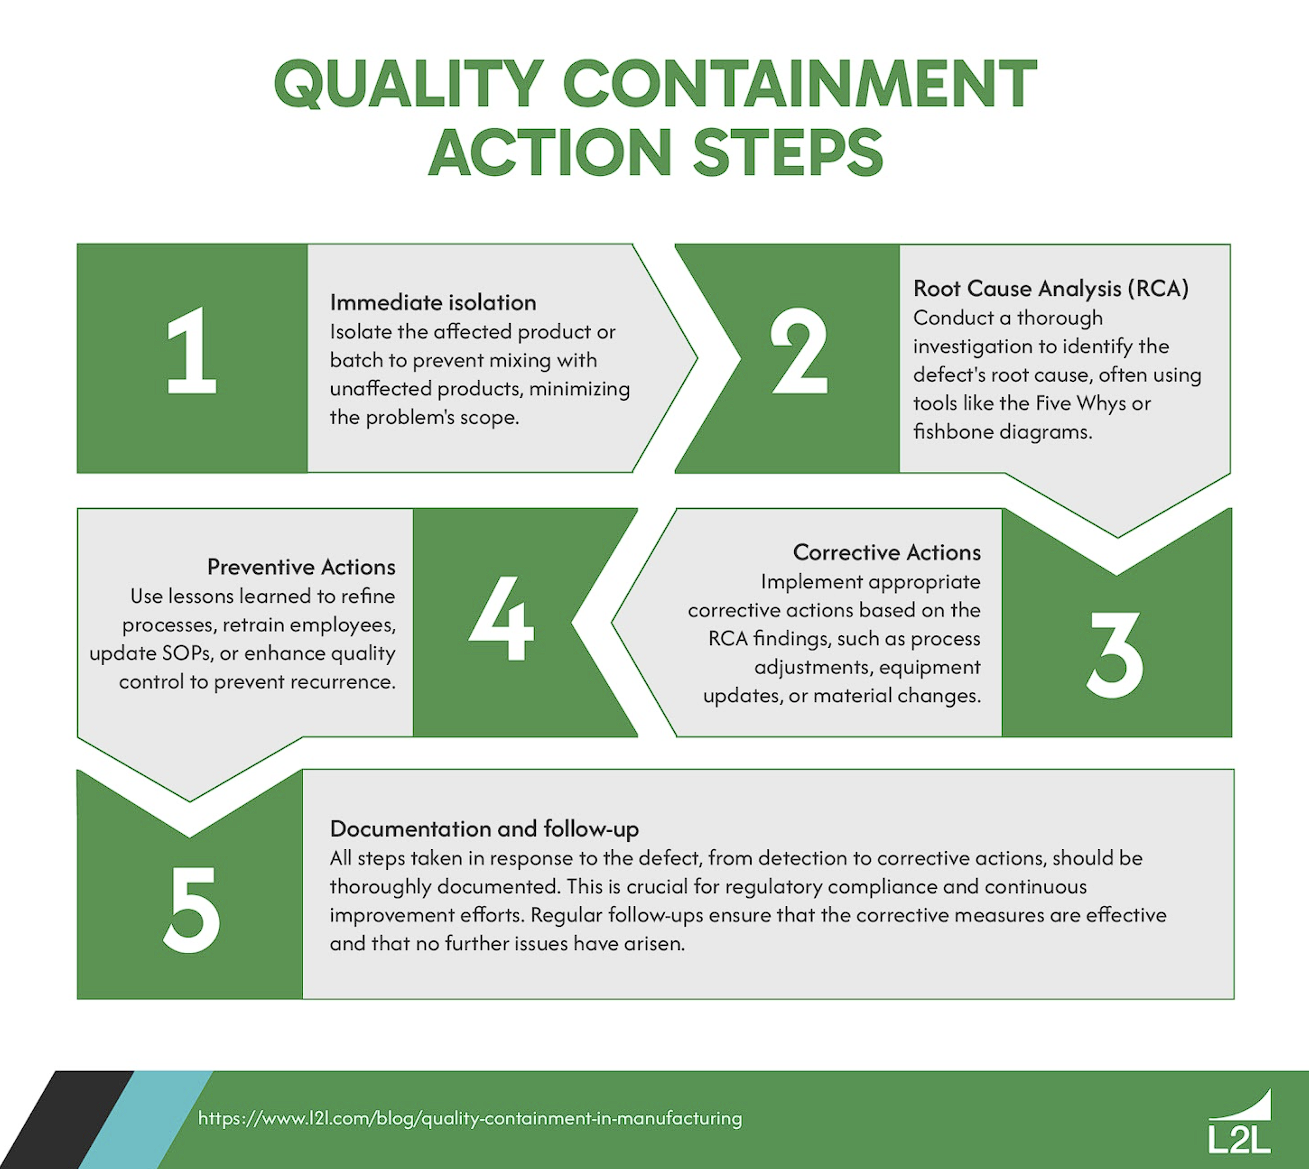 Quality Containment in Manufacturing: How to Ensure Product Integrity Featured Image